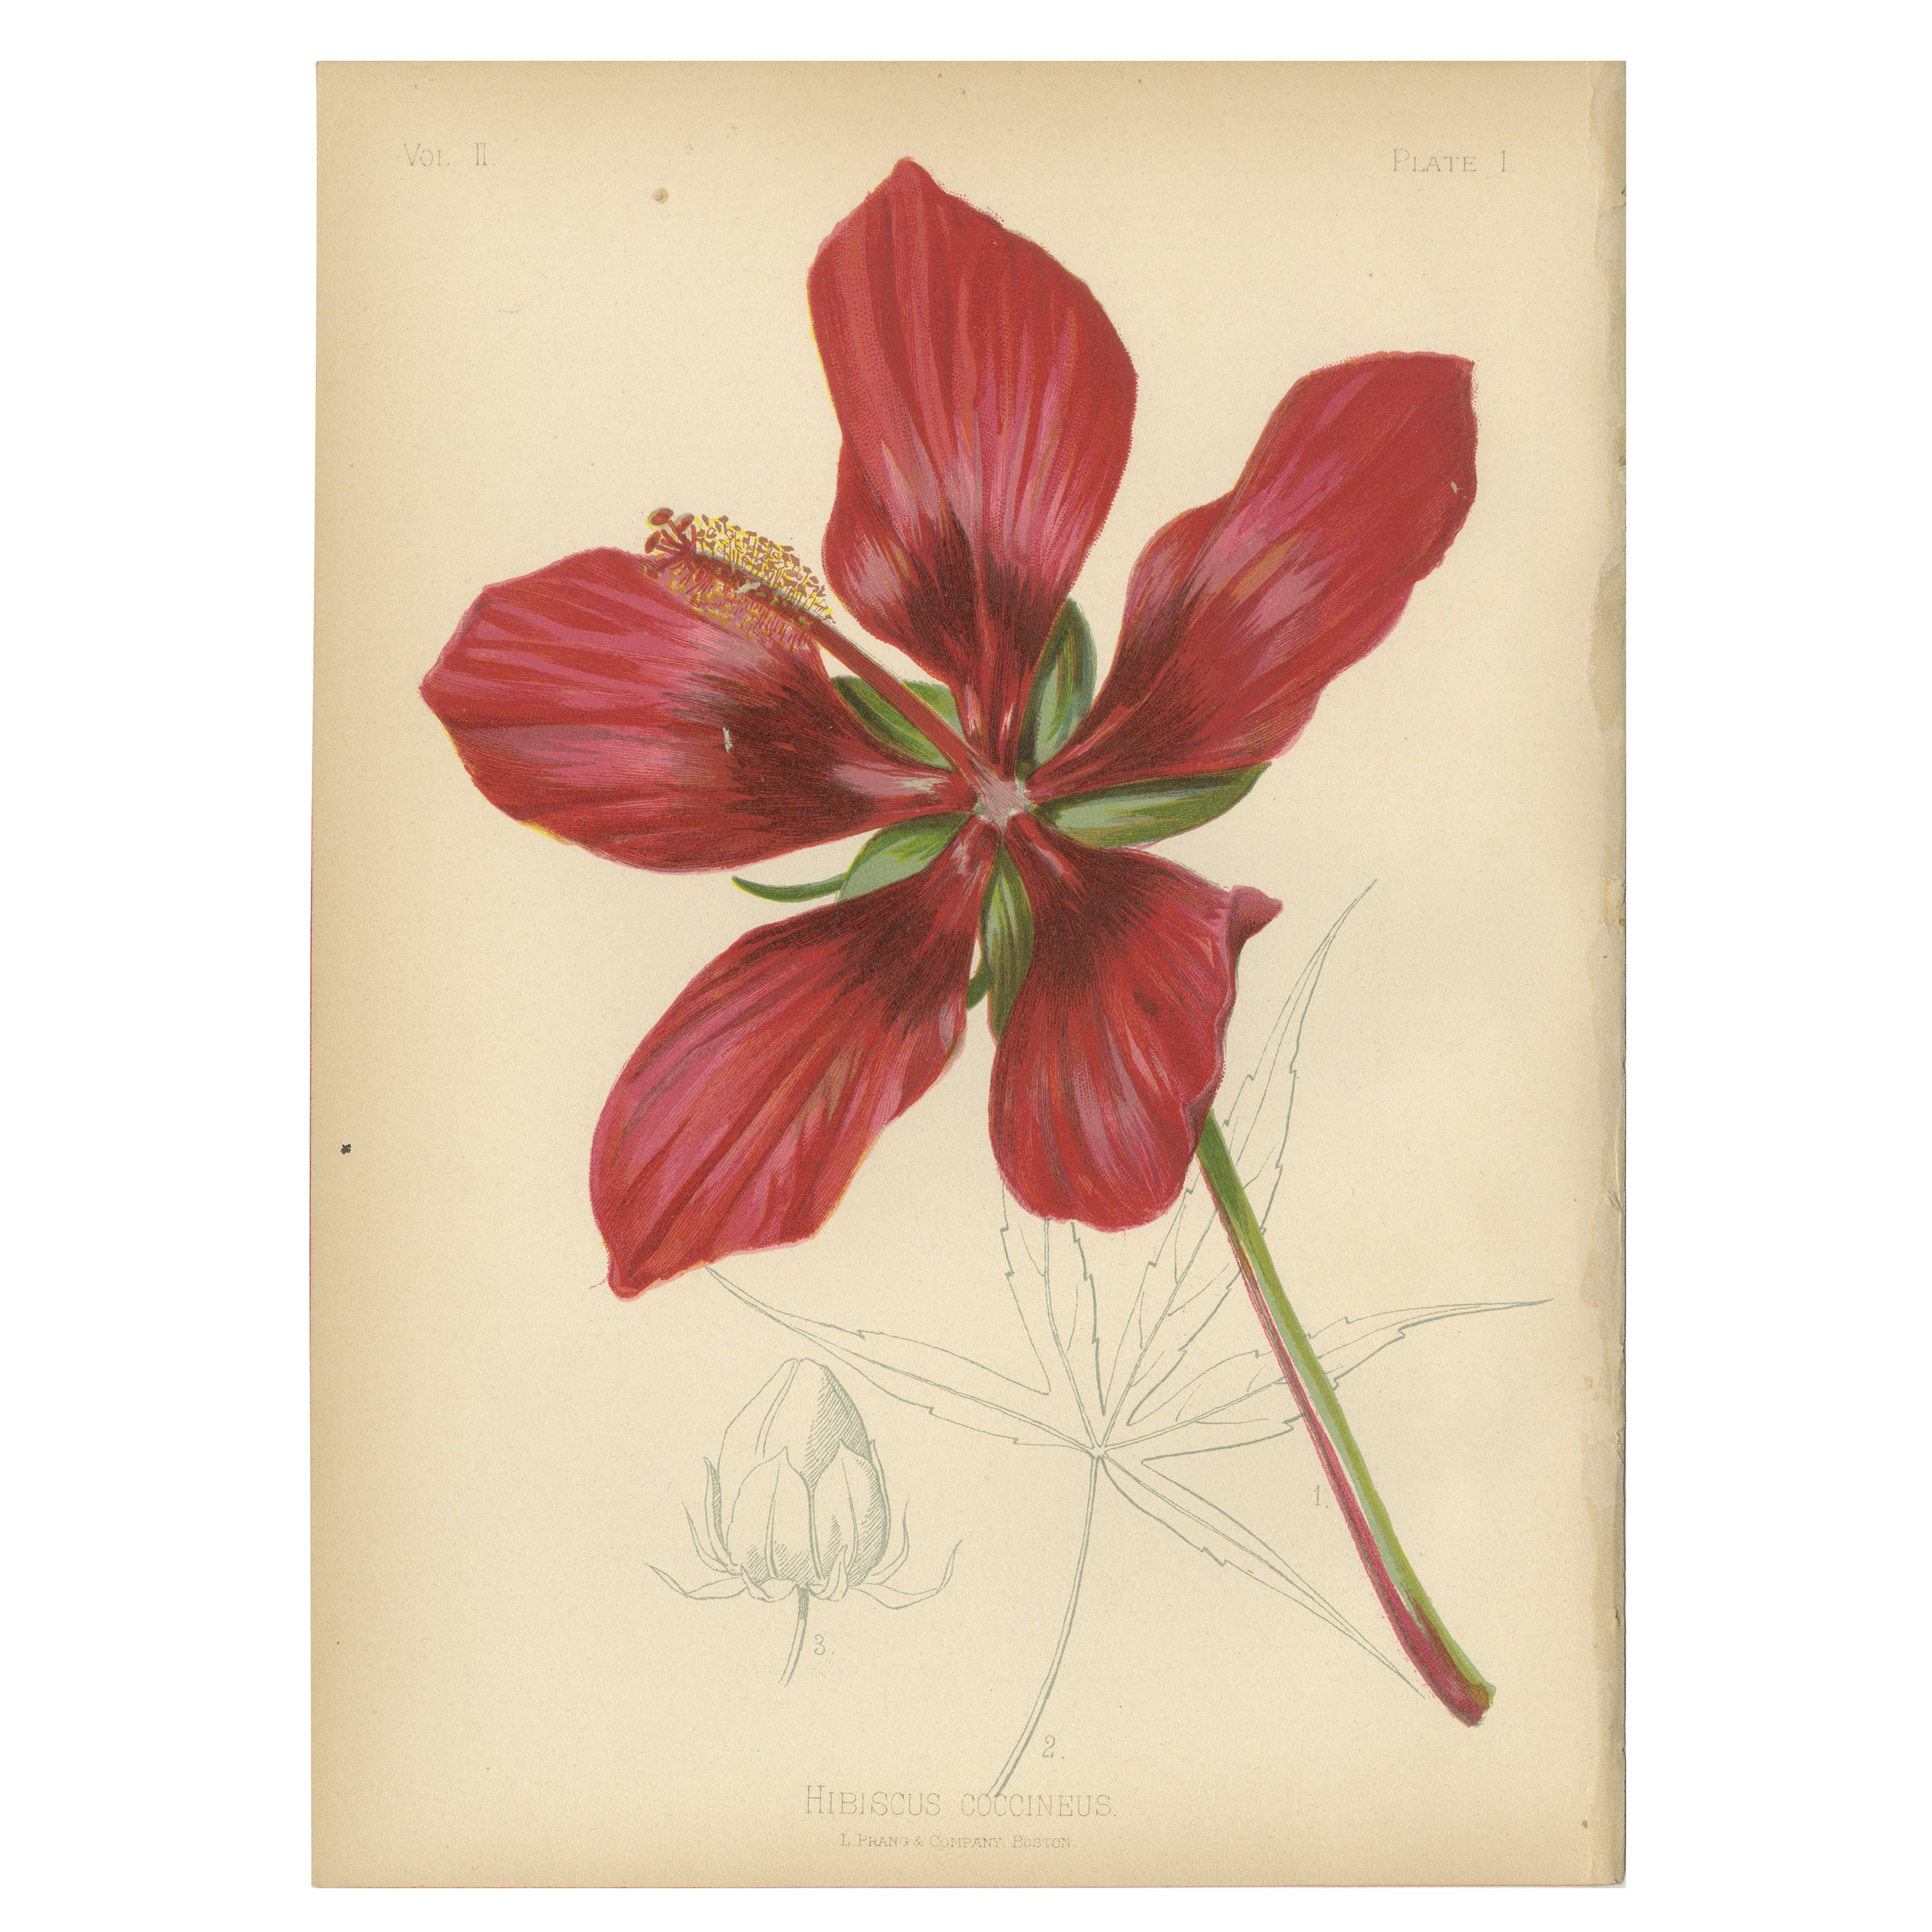 Scarlet Rosemallow from The Native Flowers and Ferns of the United States, 1879